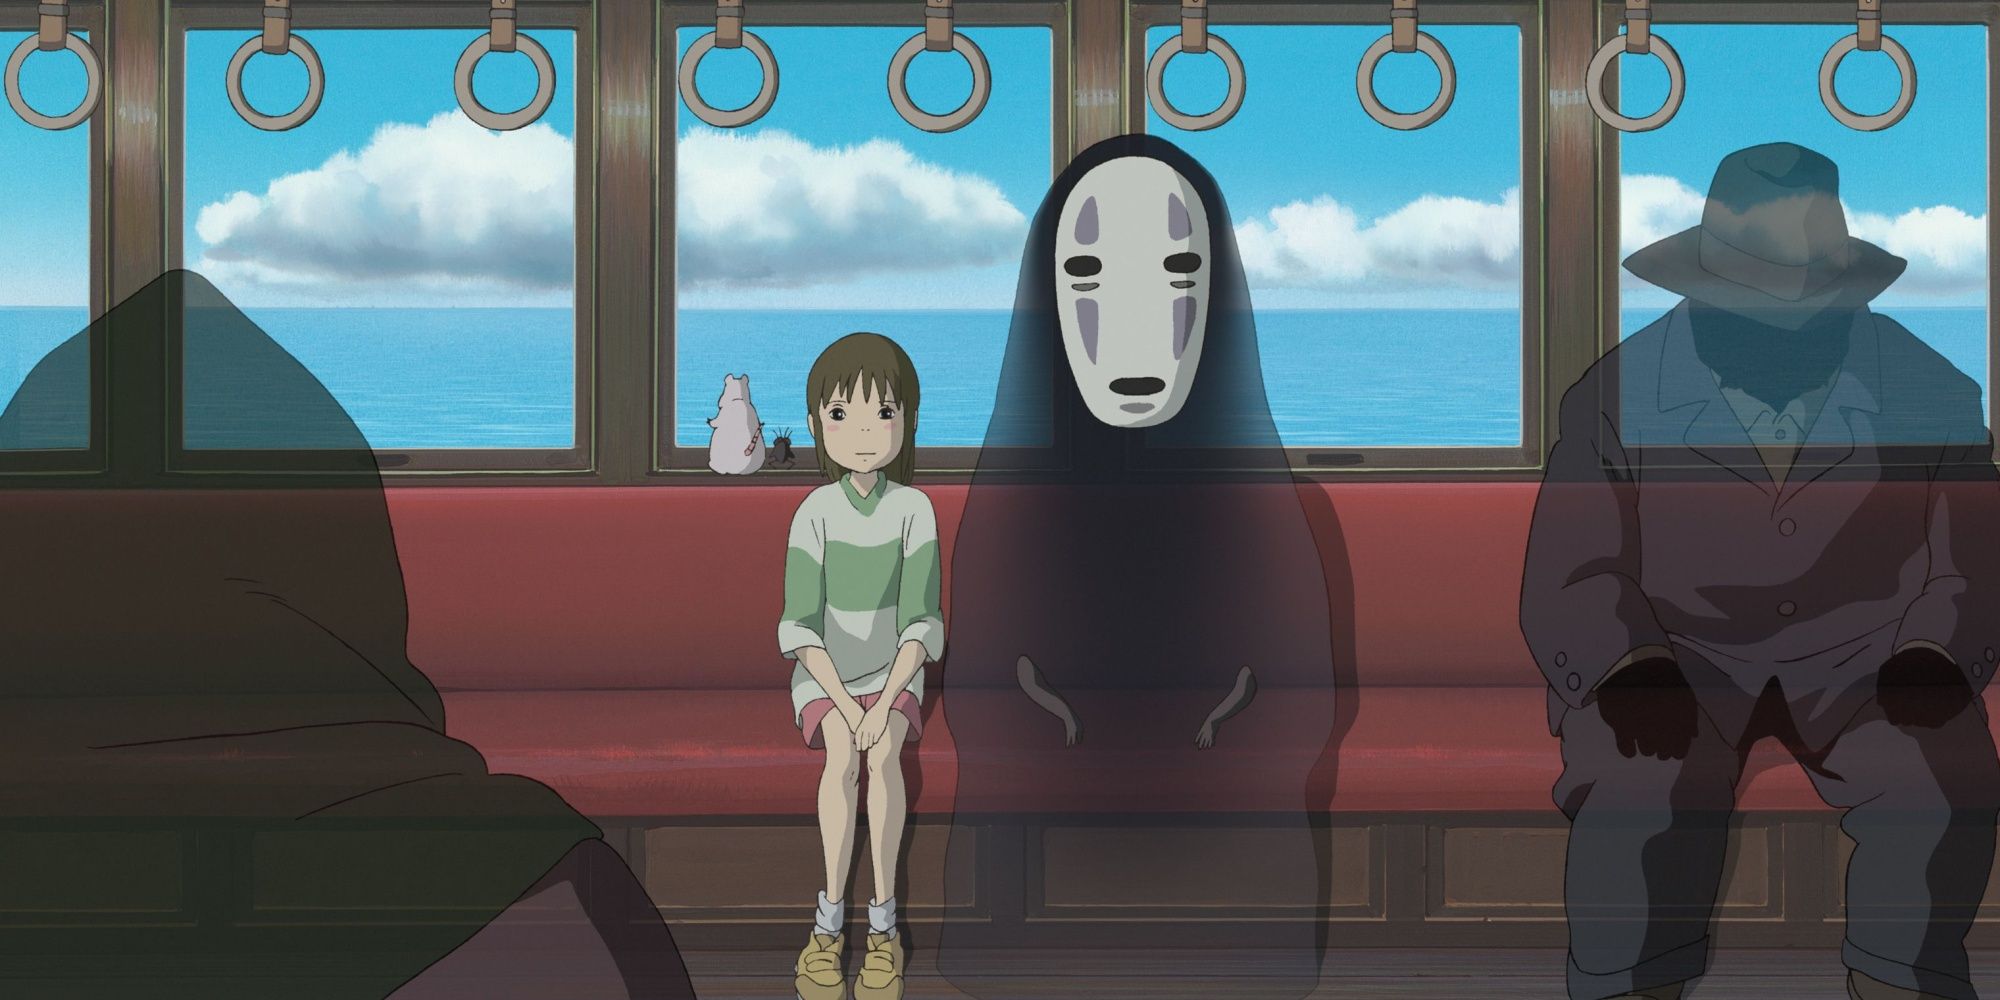 Chihiro and No-Face on the train.